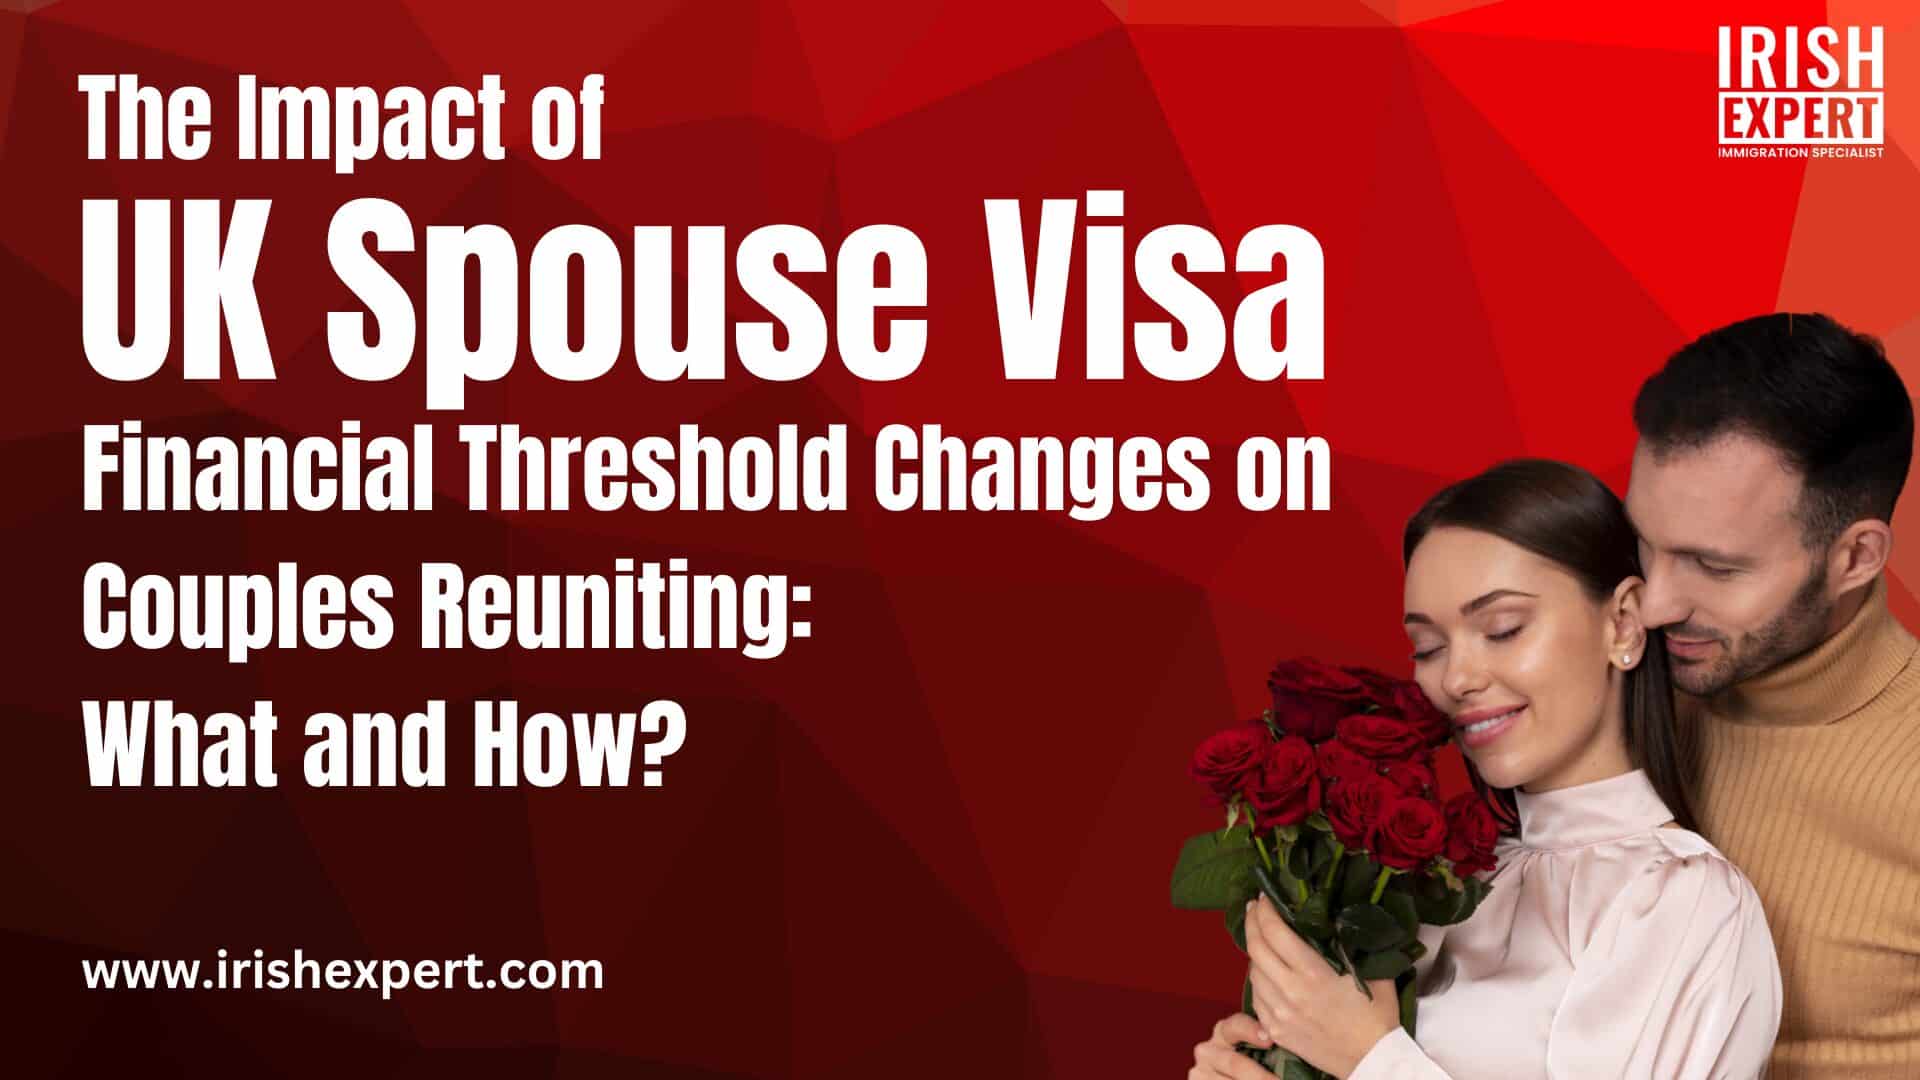 The Impact of UK Spouse Visa Financial Threshold Changes on Couples Reuniting: What and How?